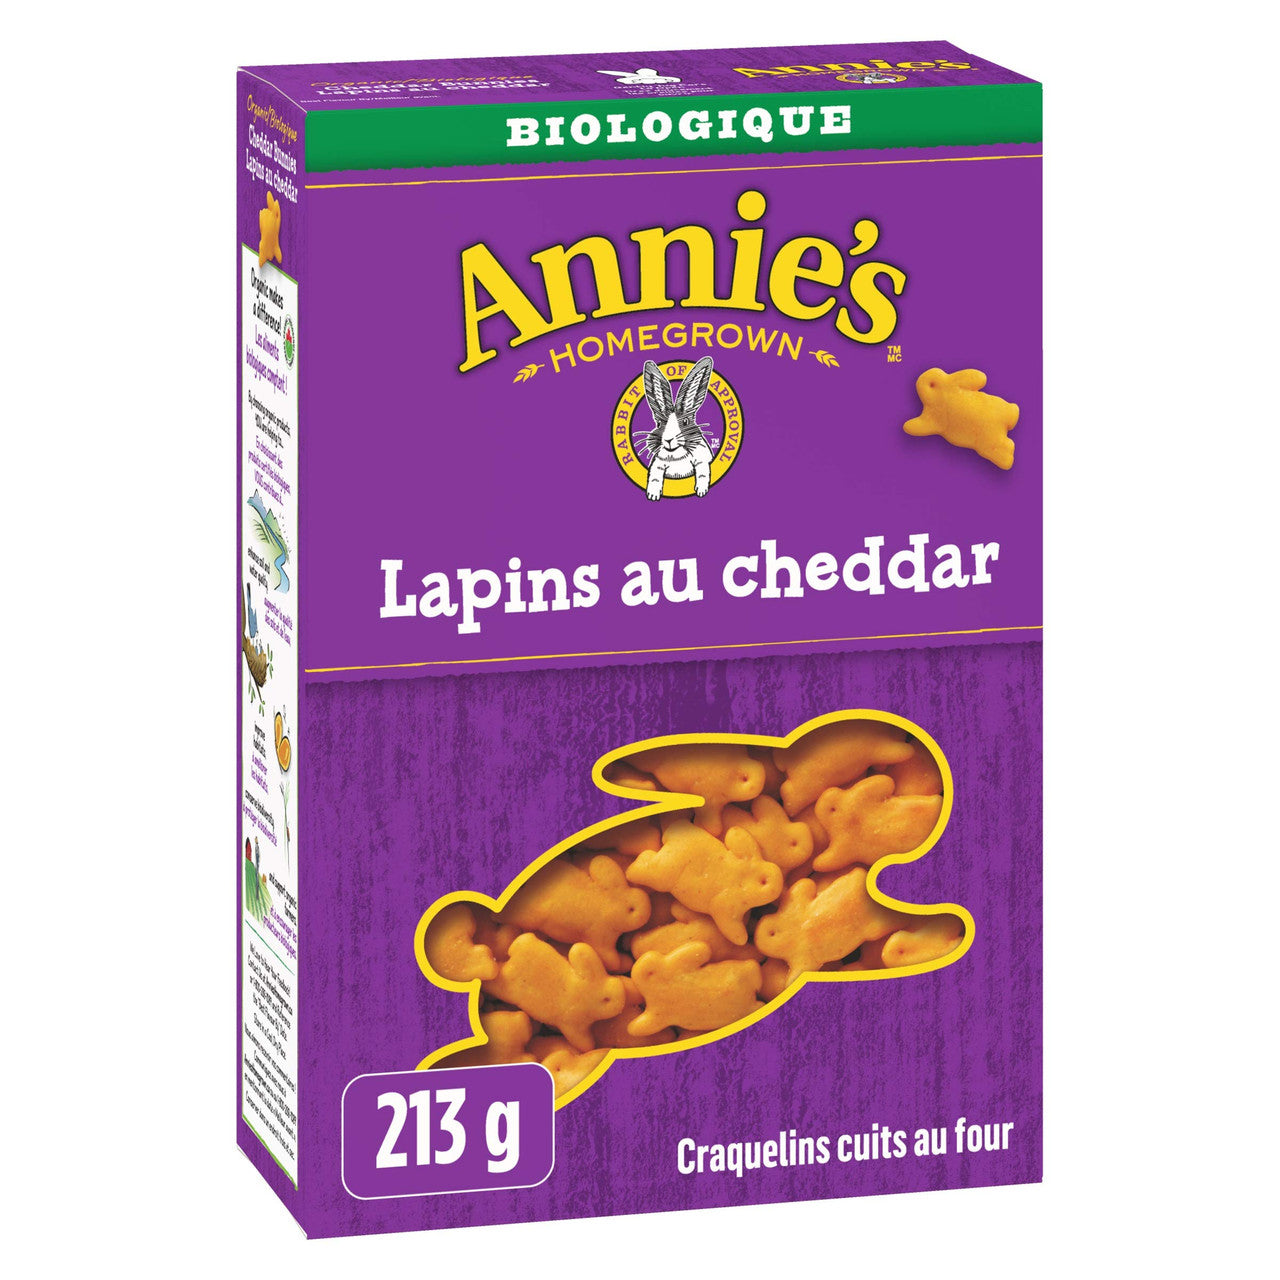 Annie's Homegrown Organic Cheddar Bunnies Baked Snack Crackers, 213g/7.5oz.,{Imported from Canada}